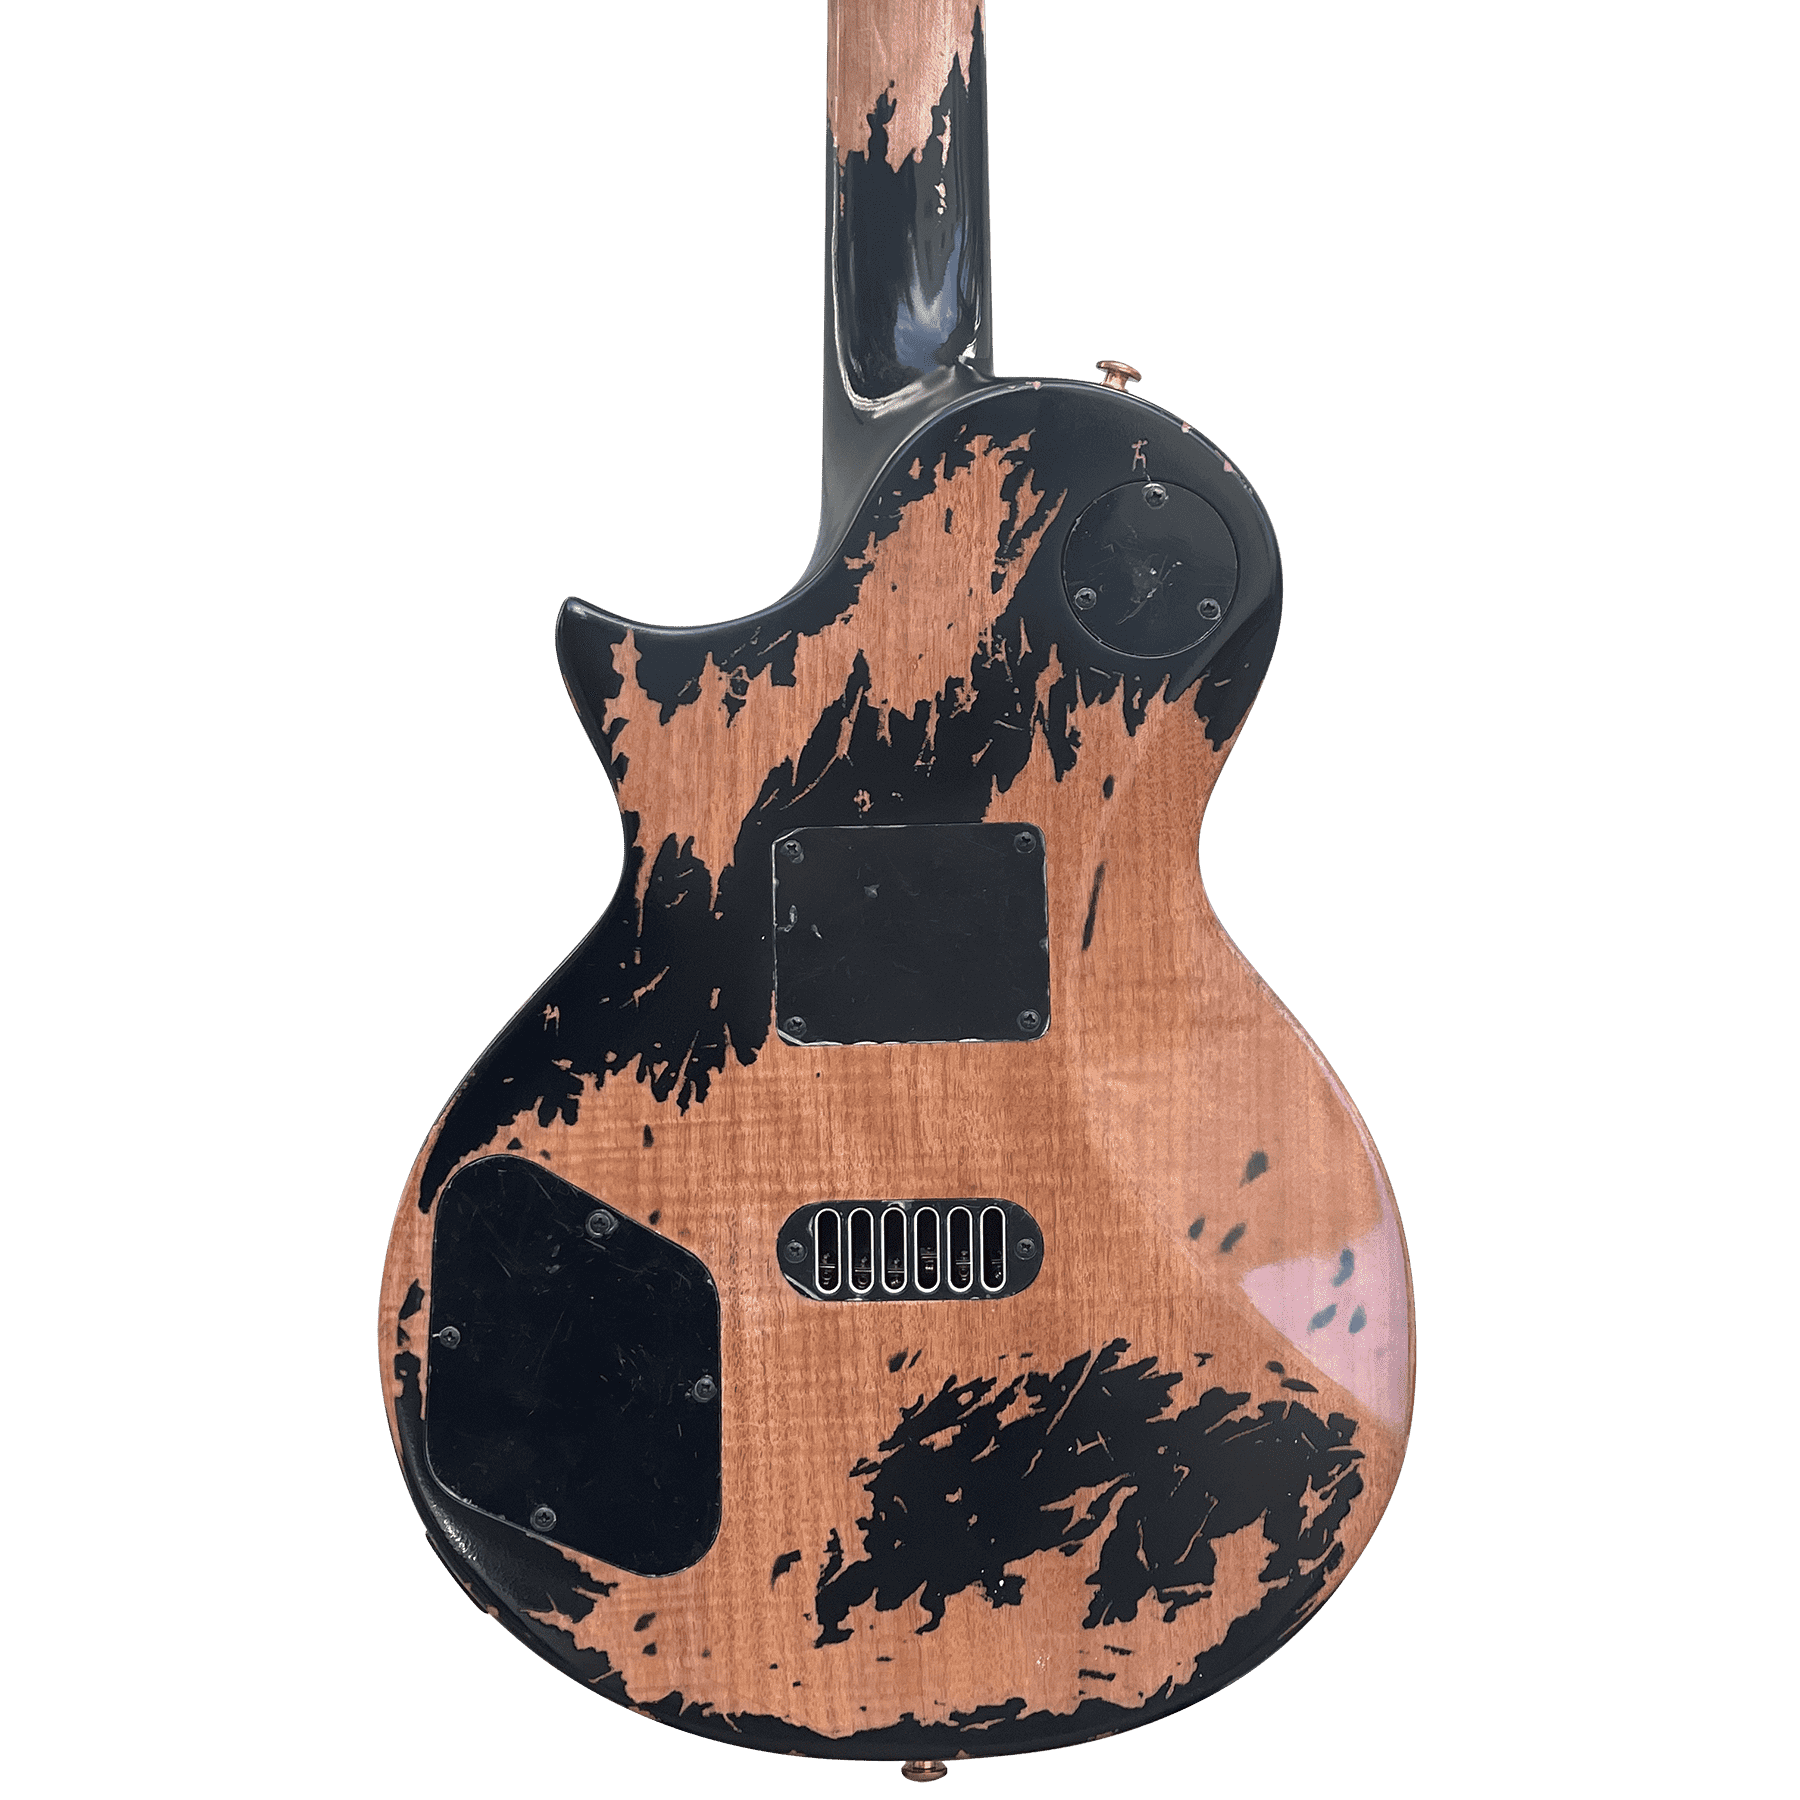 Old Blackie Relic Evertune - 10S Guitars